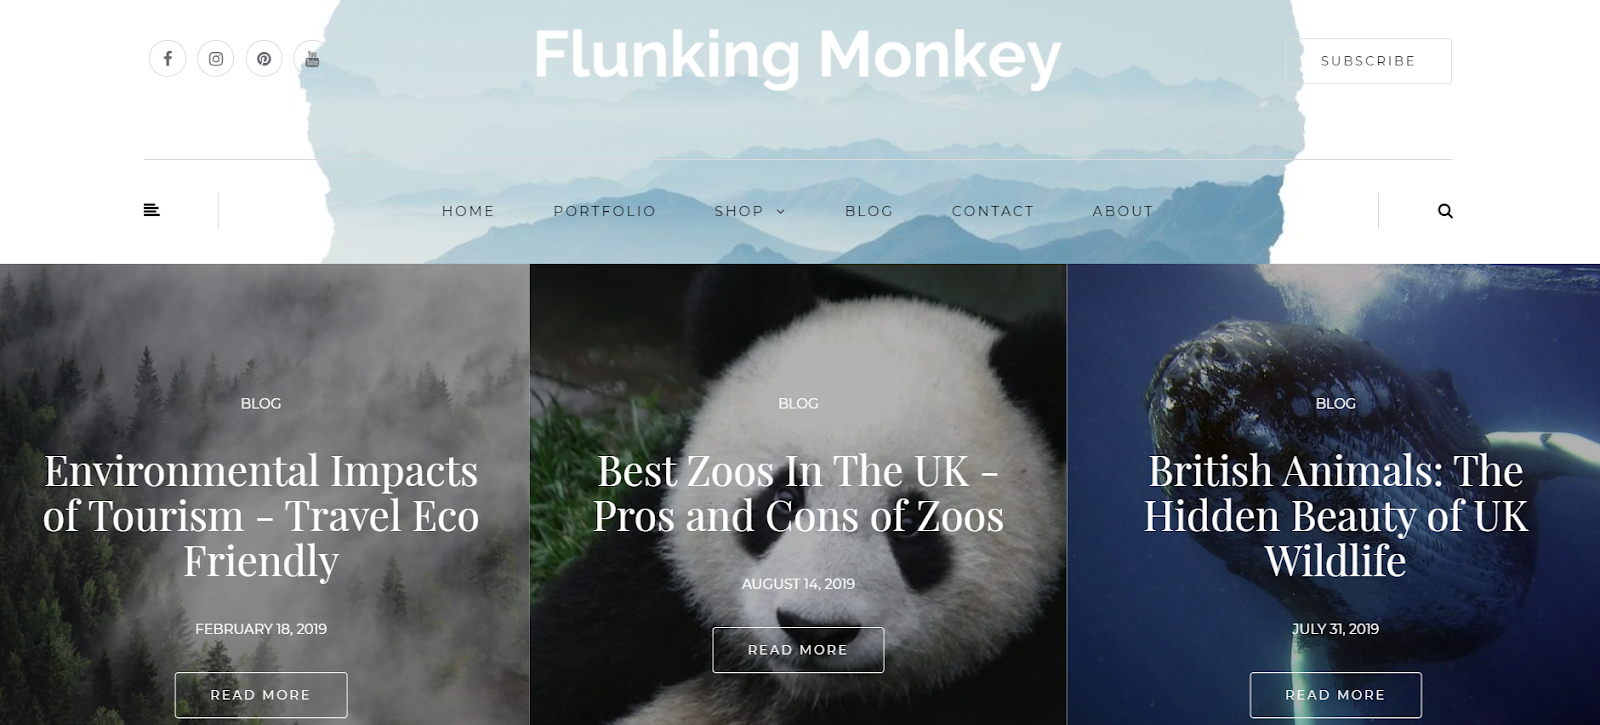 A screenshot of the homepage of the Flunking Monkey travel blog featuring recent posts, including photos of a panda, airplane, and forest.
